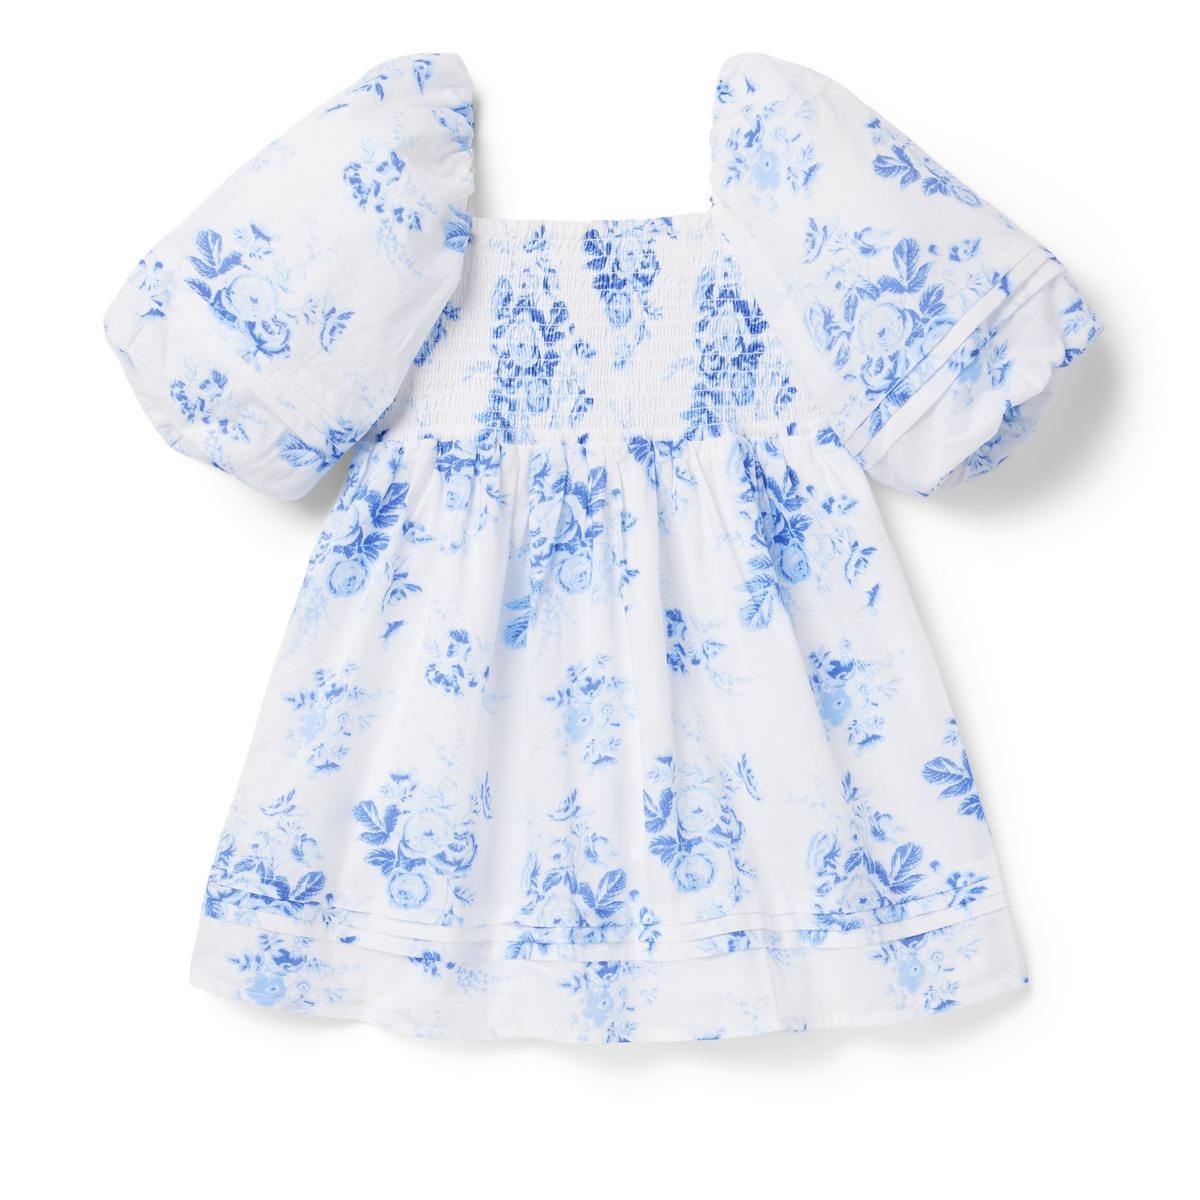 The Natalie Floral Smocked Bubble Sleeve Dress | Janie and Jack